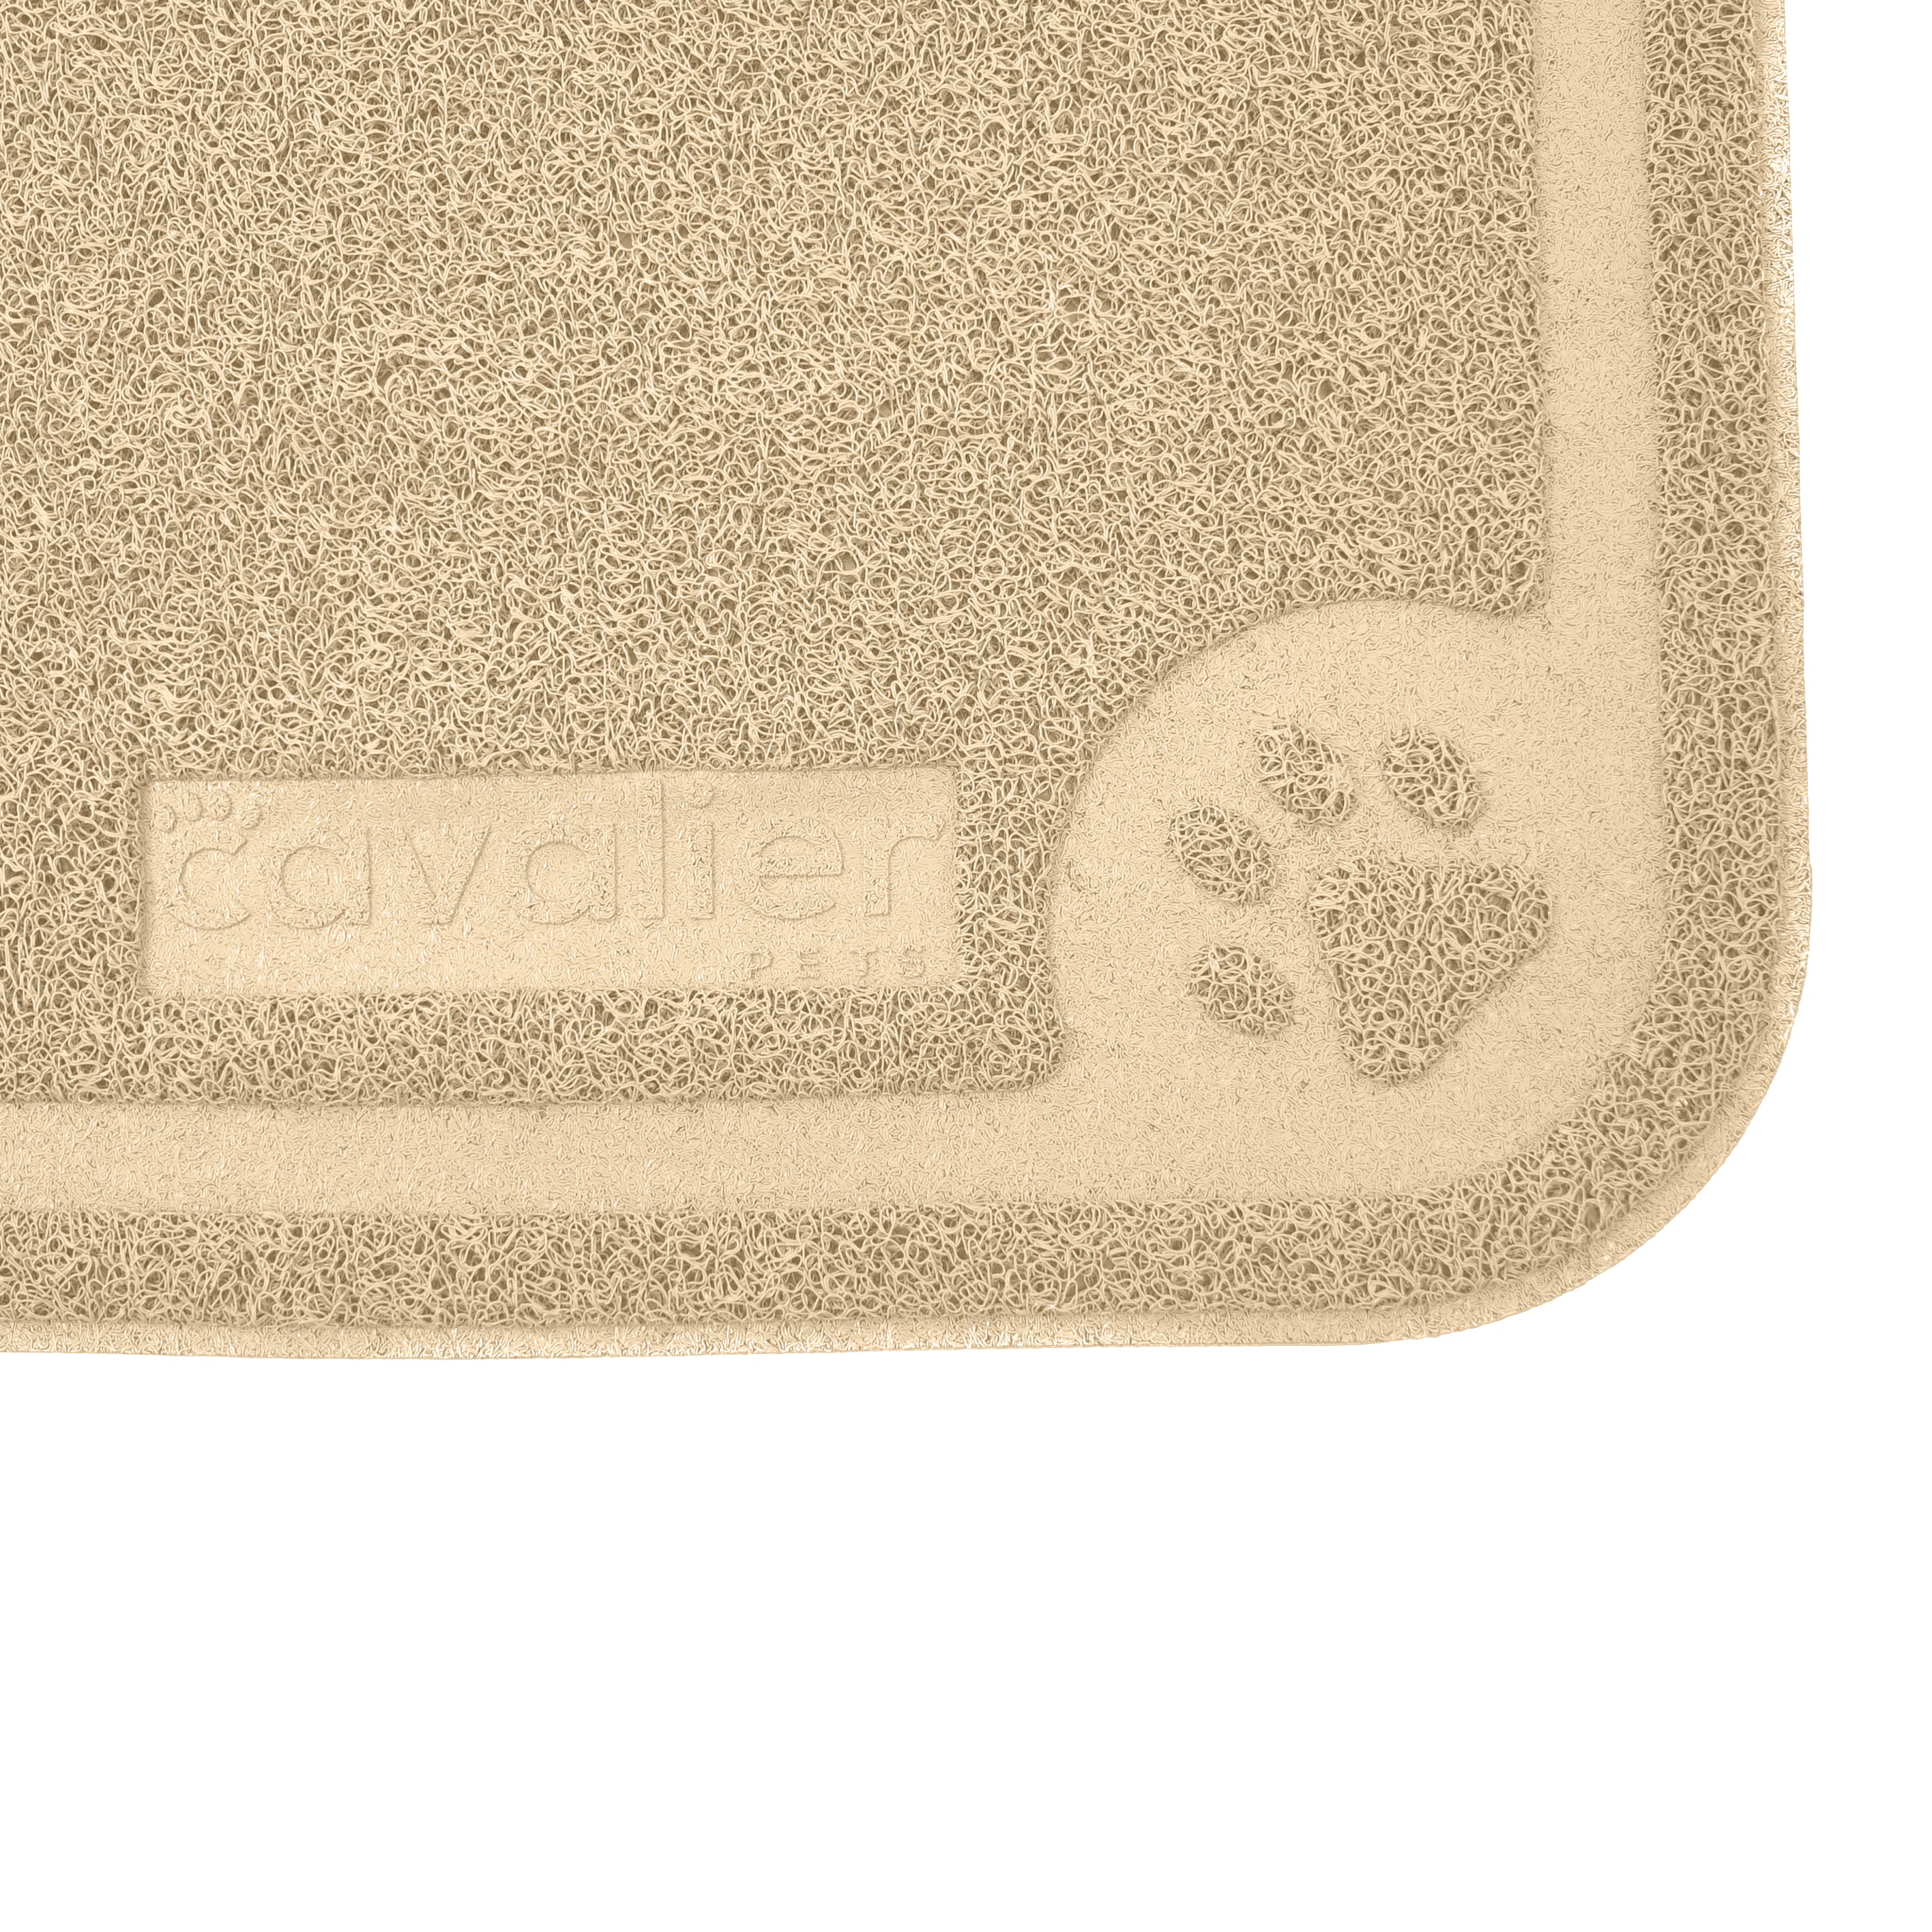 Pet Mat for Cat and Dog Bowls, Silicone Non-Slip Absorbent Waterproof Dog Food Mat